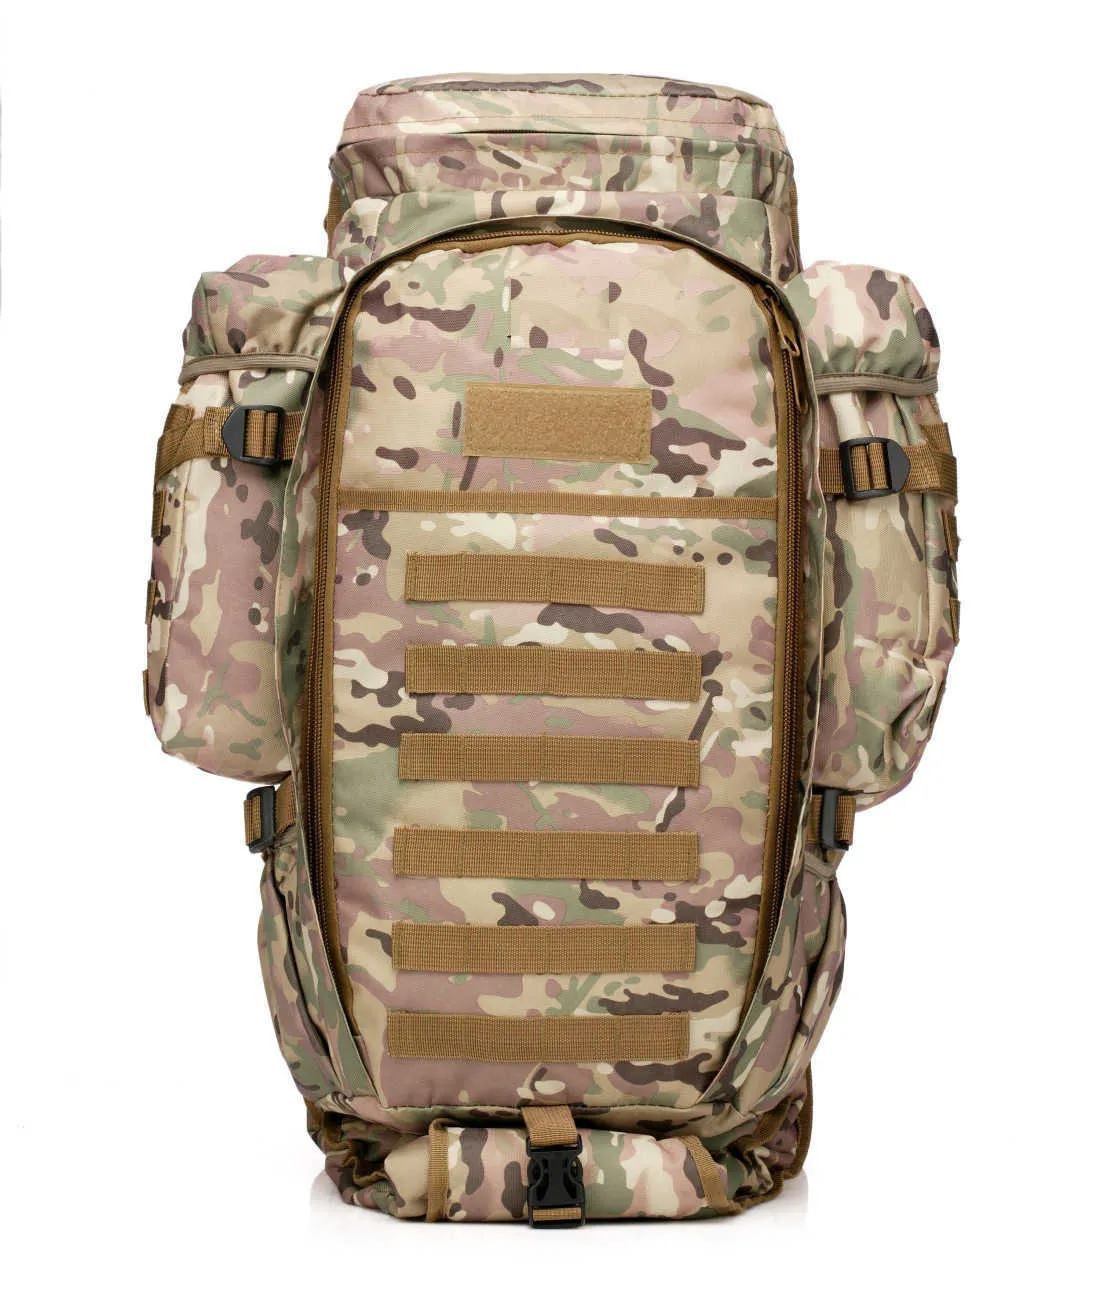 Tactical 50L Combine Backpack Combat Military Climbing Hiking Trekking Multi-Function Package Outdoor Sports Large Capacity Bags Q0721